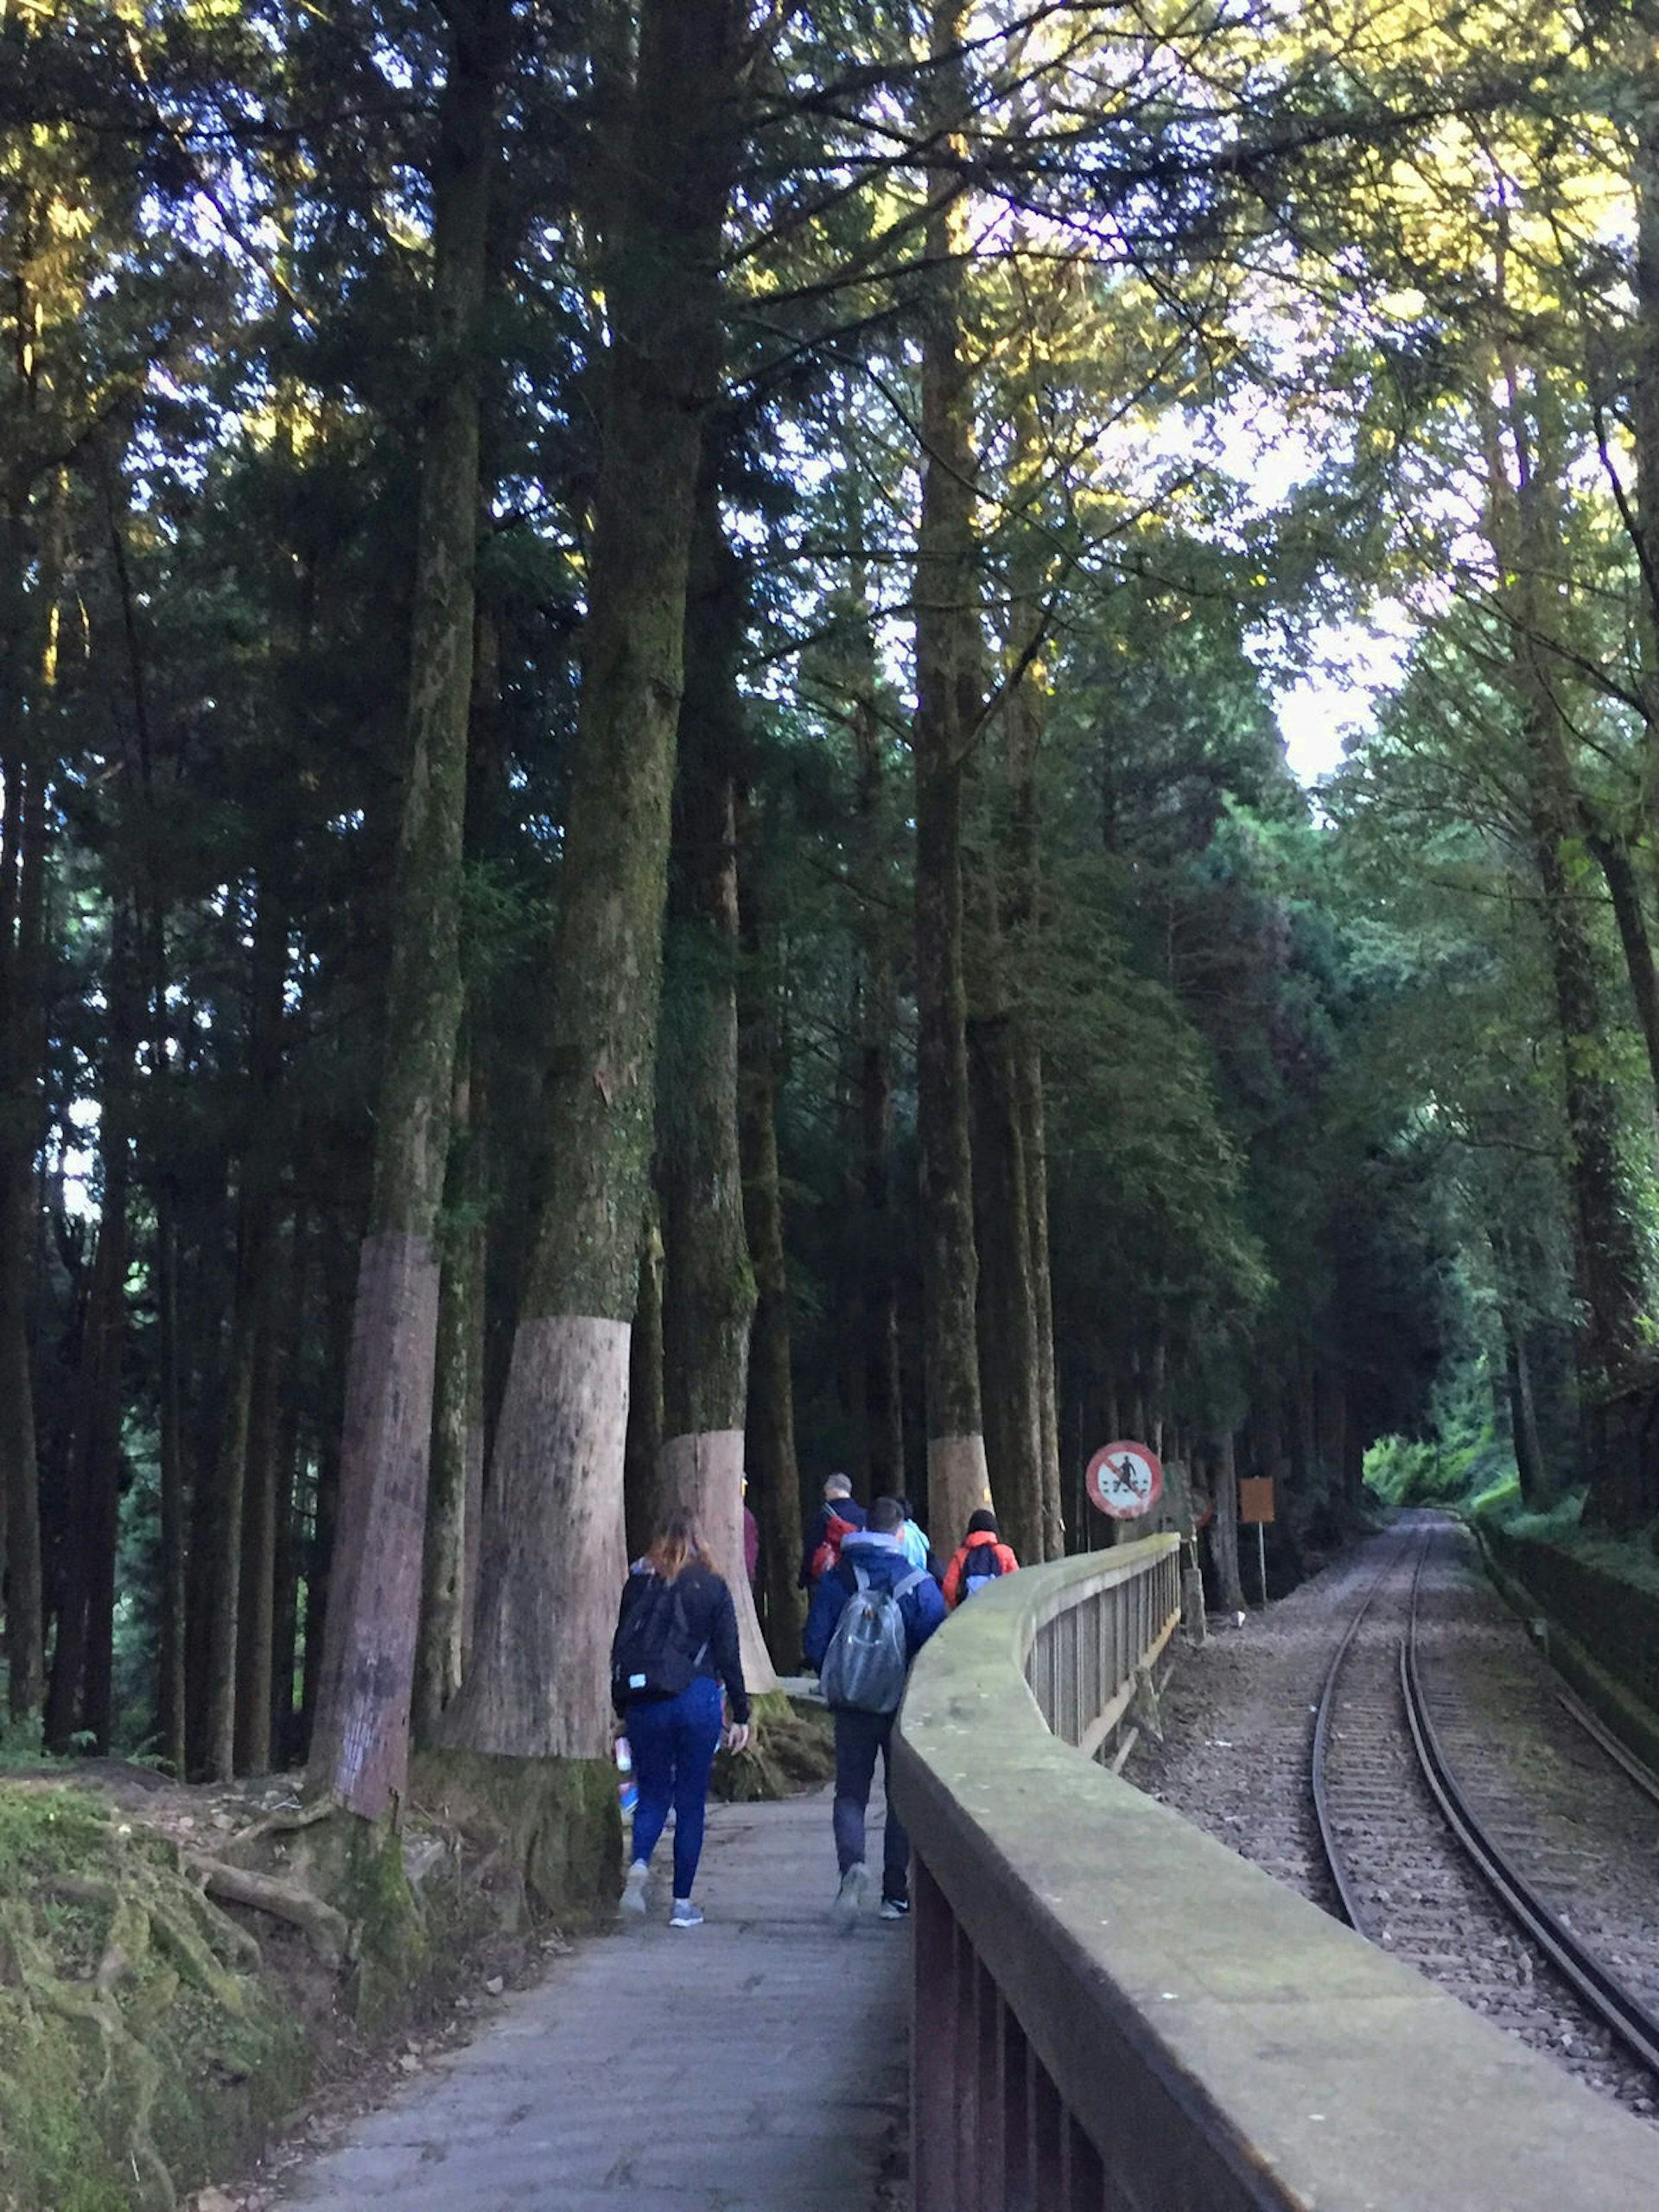 Several hikers in the distance next to tall cyprus trees, with railway tracks to the right.